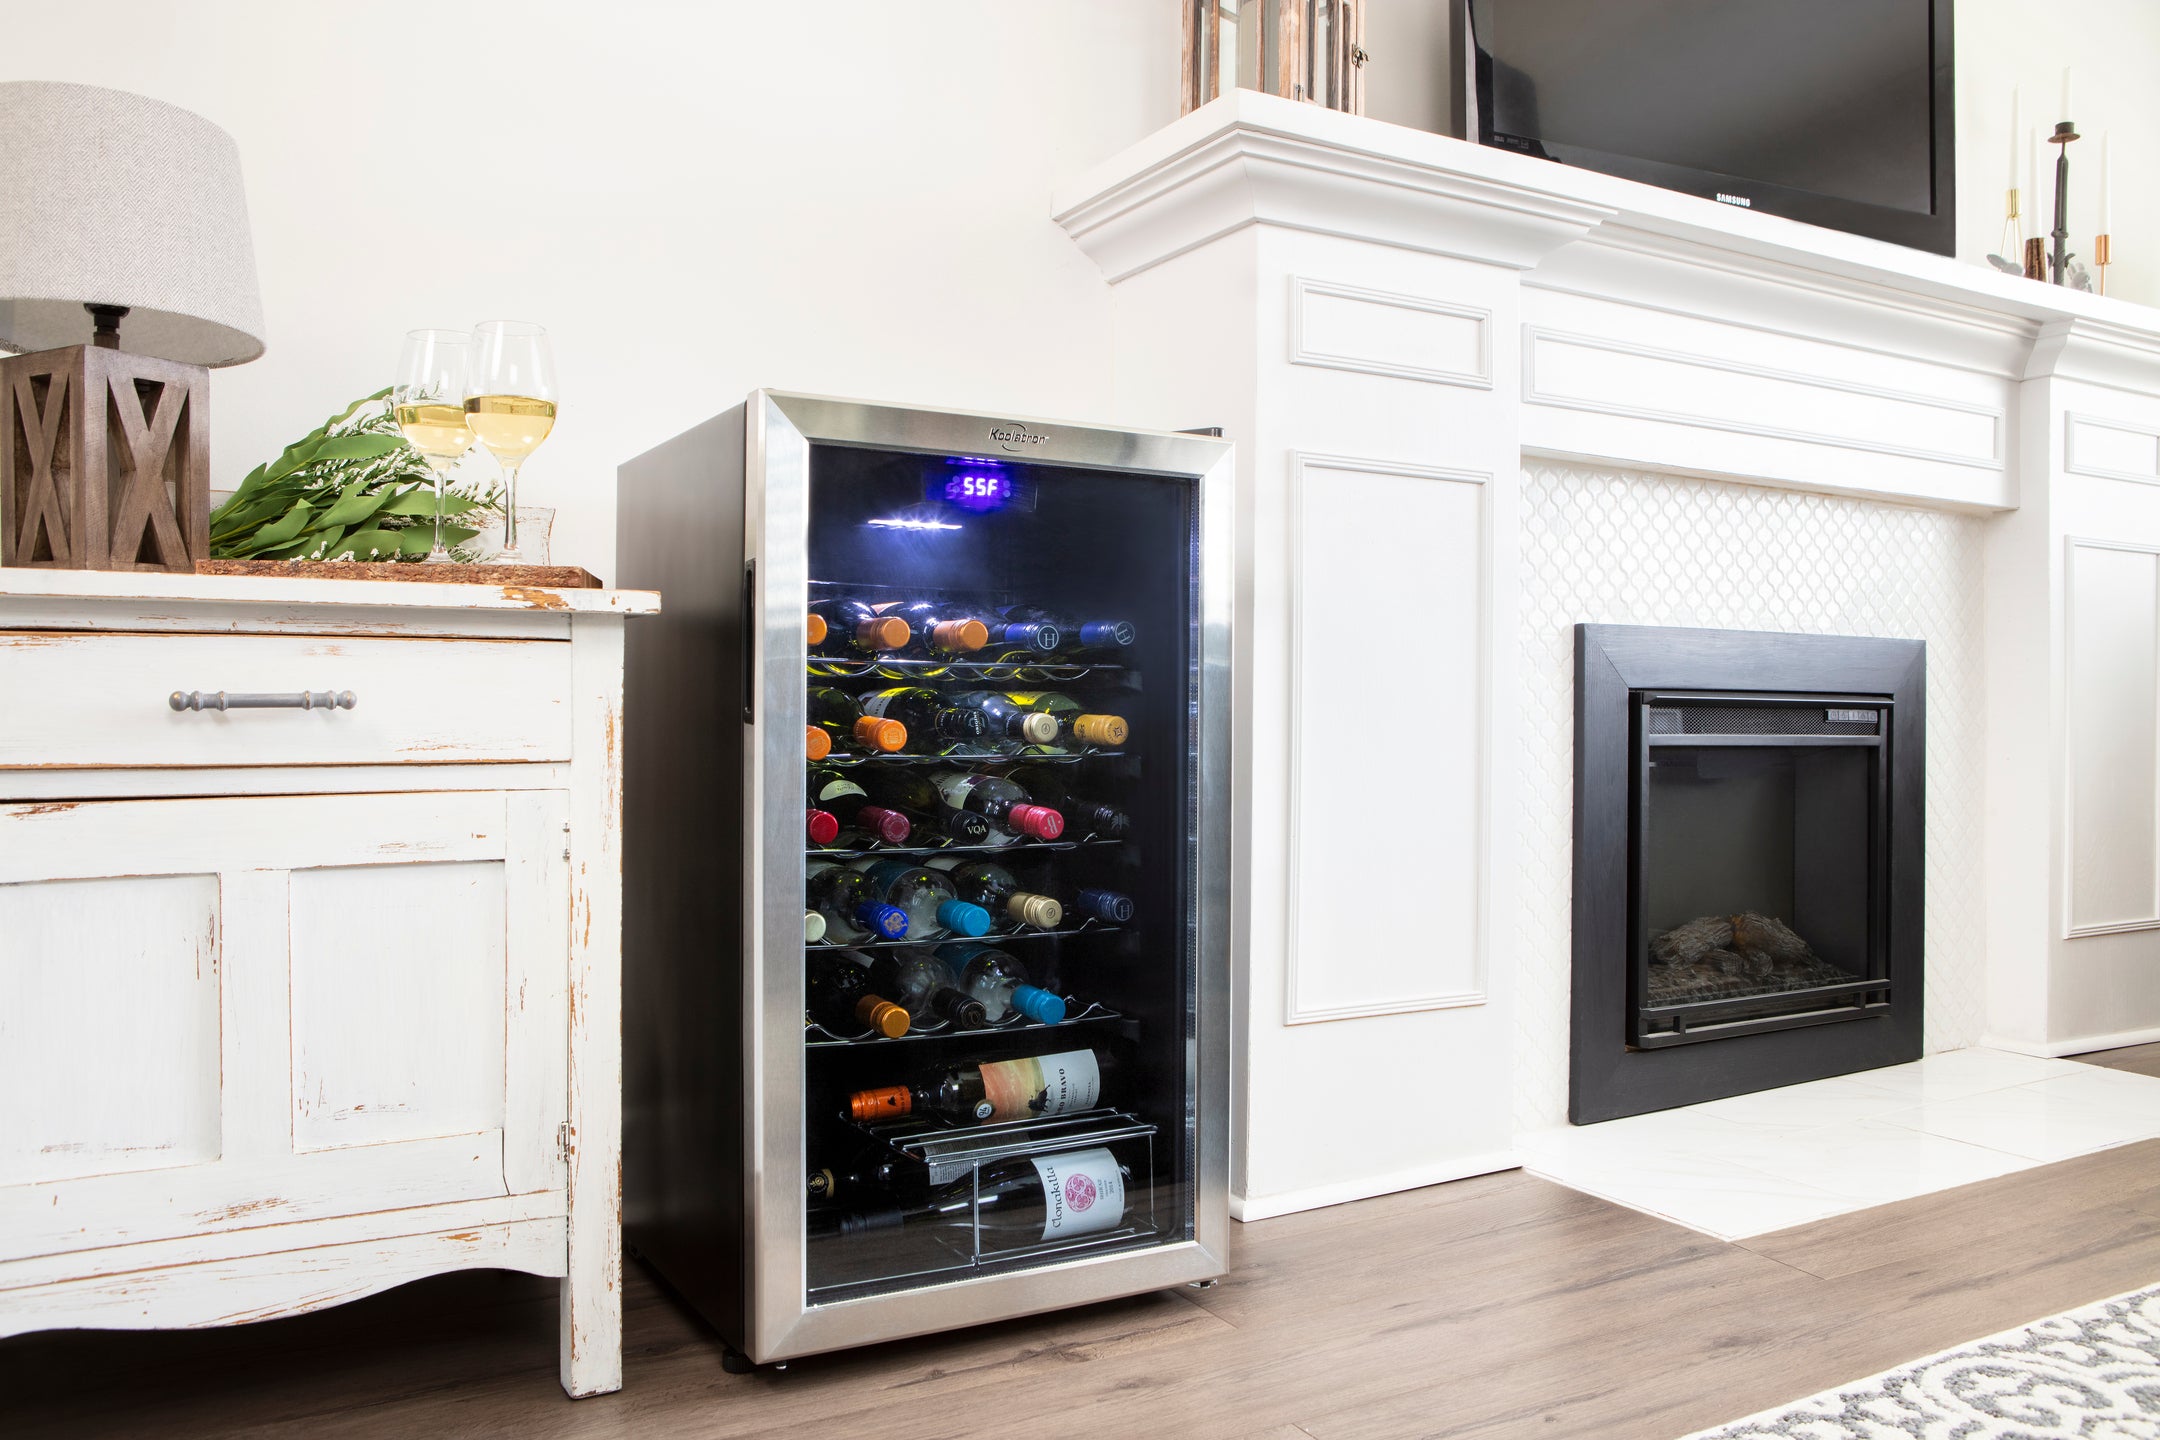 50 Bottle Wine Fridge in a living room beside a fireplace and console. Text reads " Technology meets style. See our full range of Wine coolers. Shop Now"  